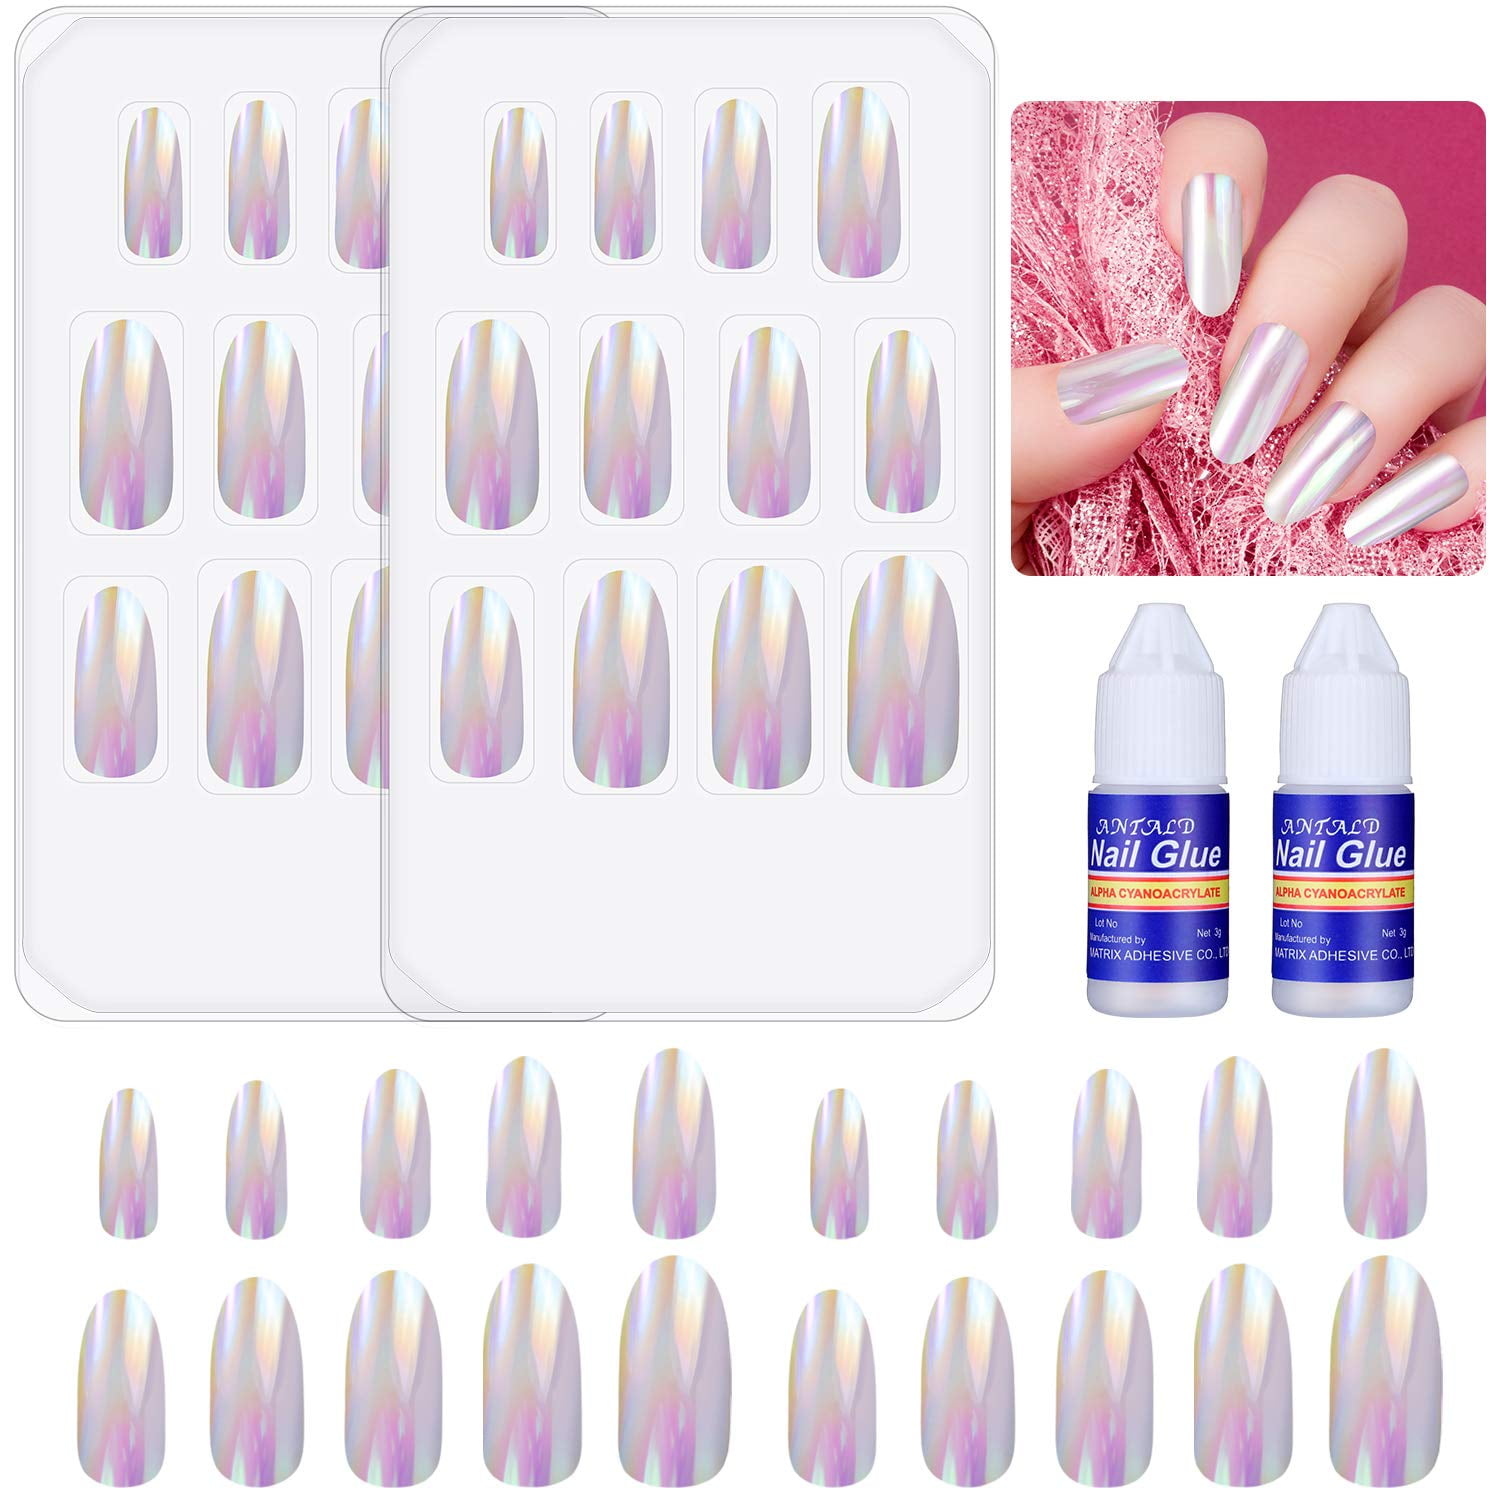 48 Pieces Stiletto Fake Nails Full Cover False Nails Bright Mirror Effect  Fake Nail Tips with 2 Pieces Nail Glue for Women Nail DIY Decorations |  Walmart Canada